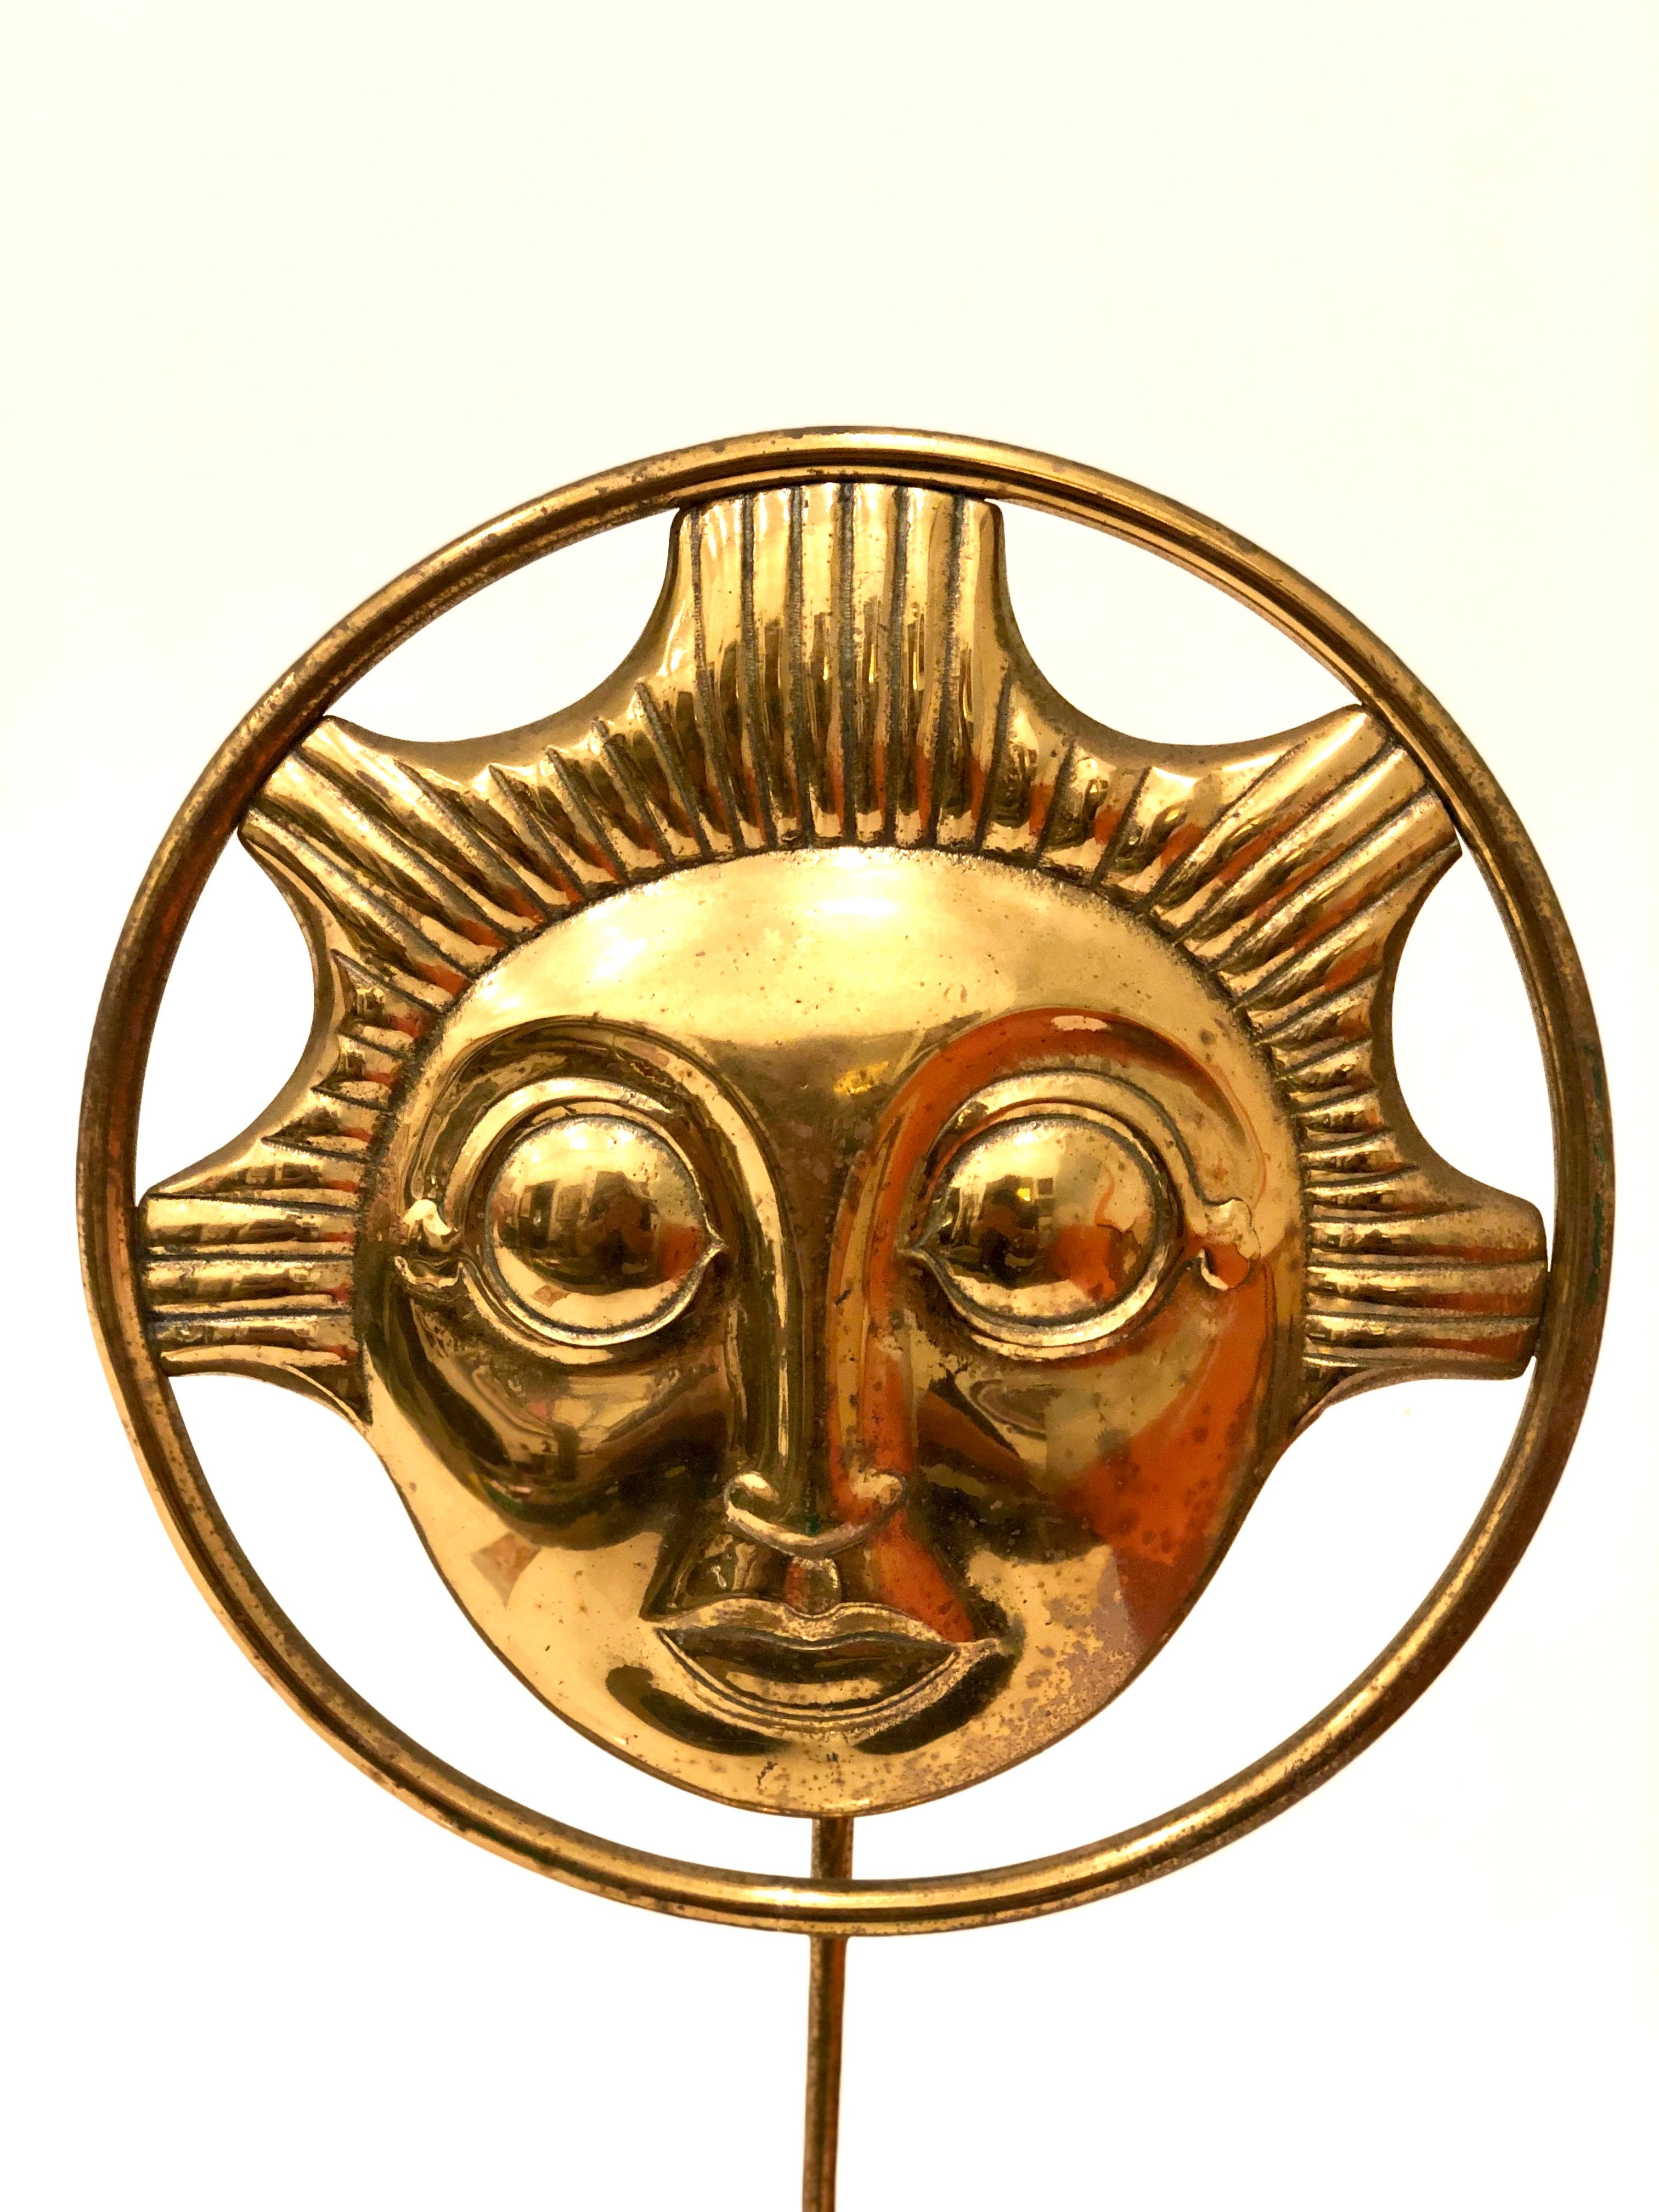 Rare solid brass sun sculpture, circa 1977 stamped at the bottom, nice polished finish with some patina natural to age.